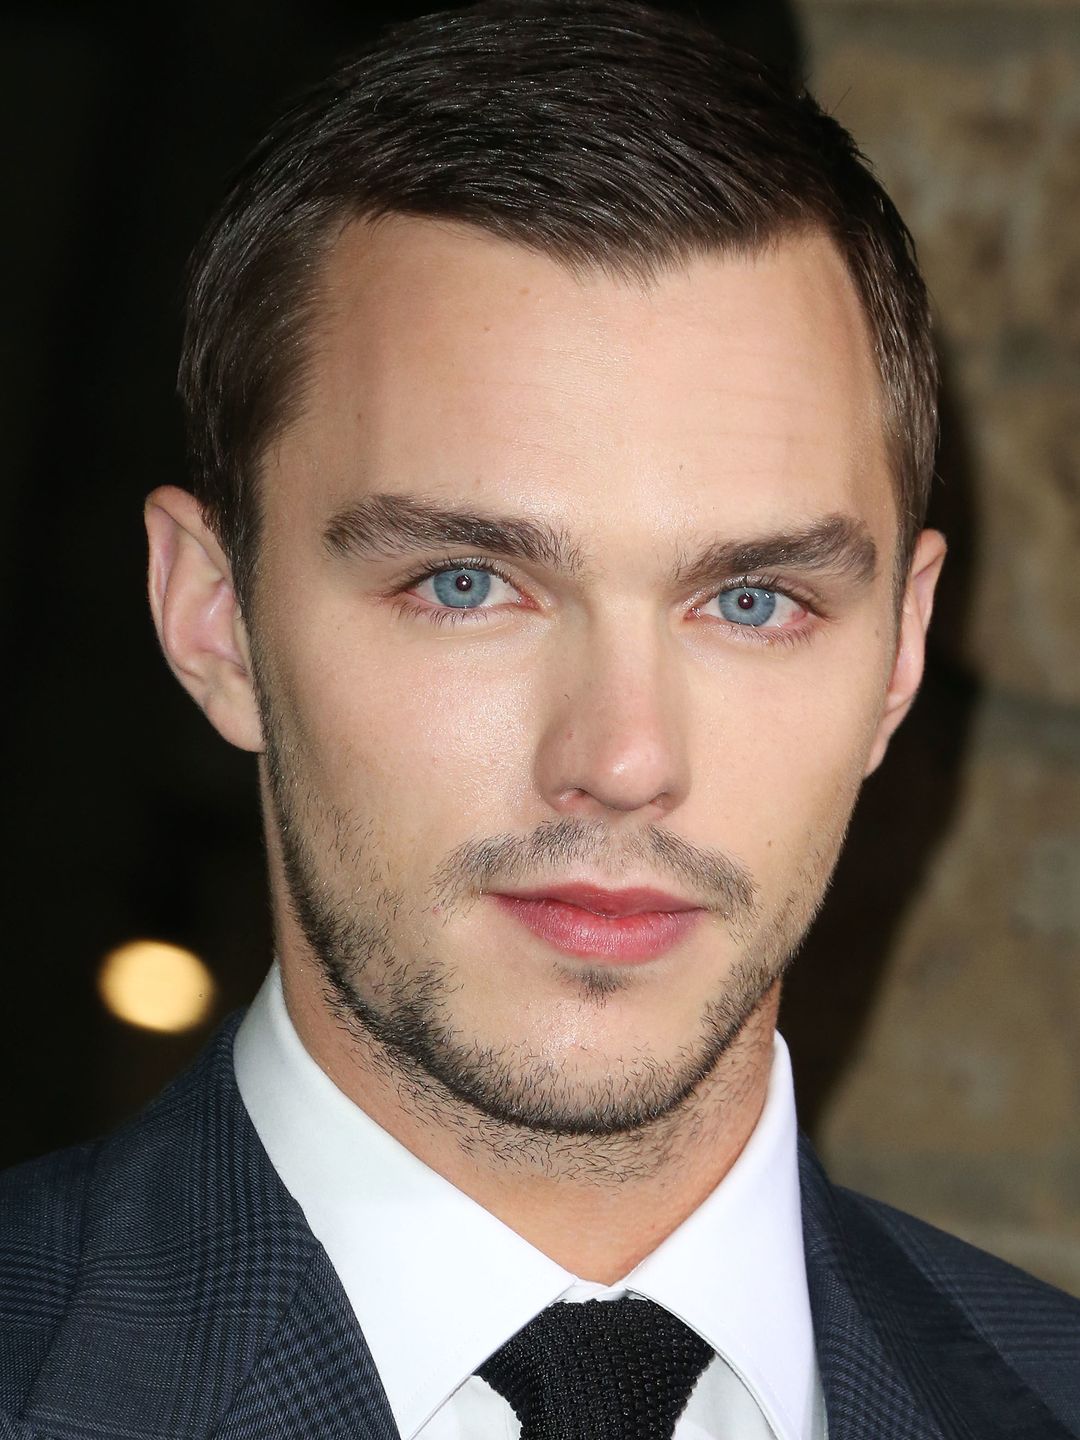 Nicholas Hoult who is his mother